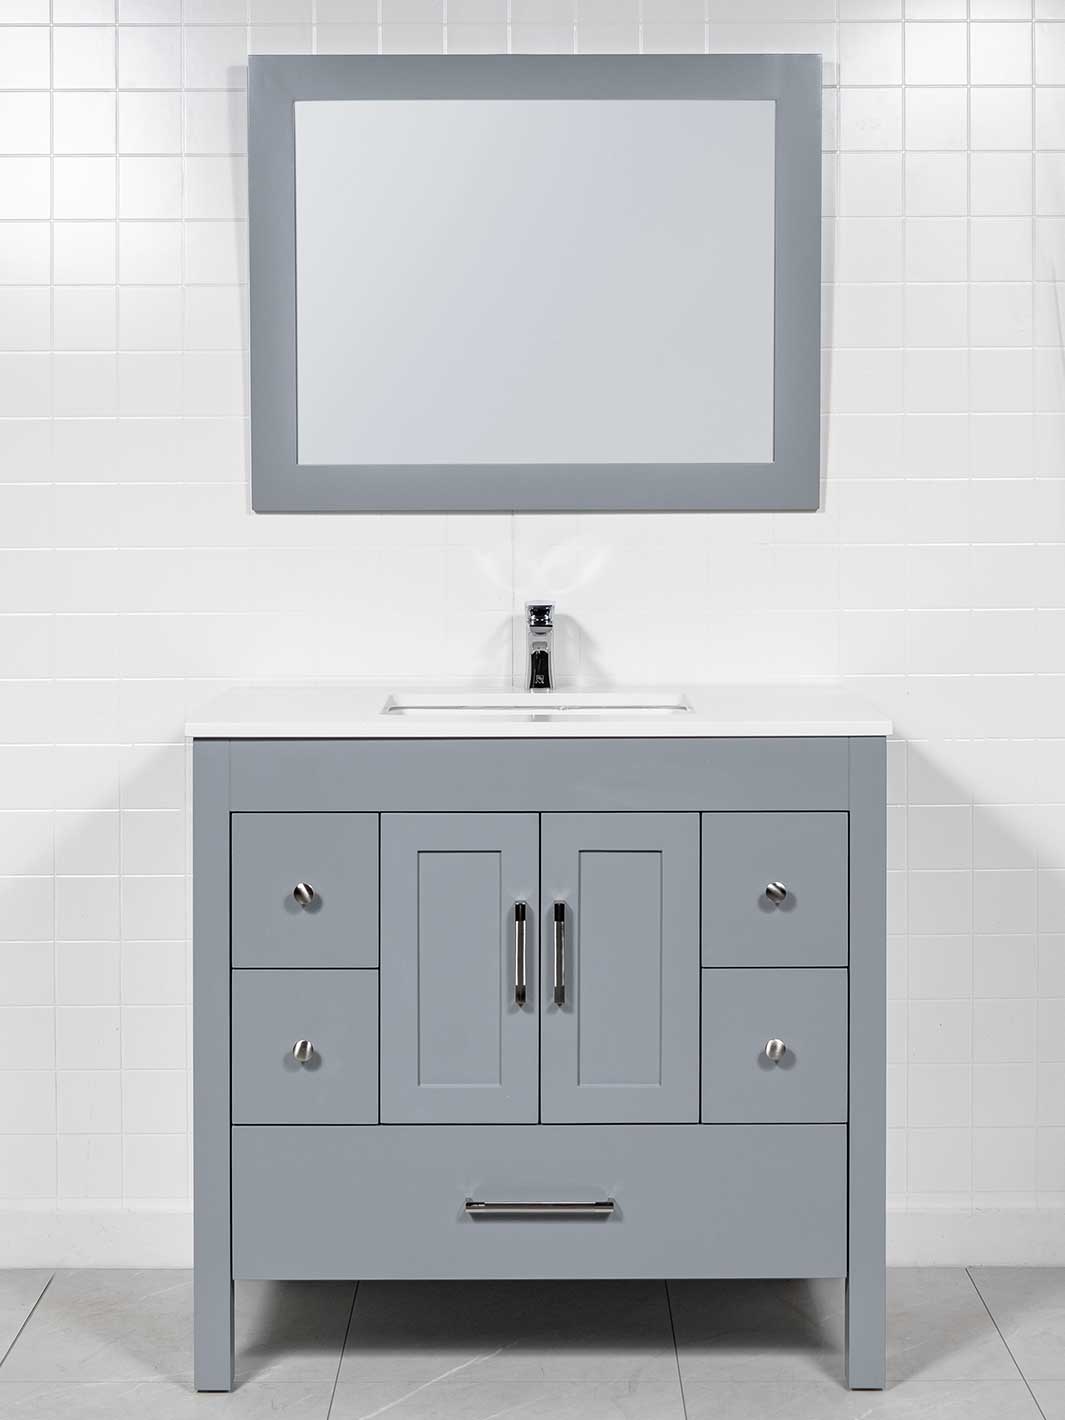 grey vaity with matching mirror, white couinter, chrome faucet and pulls